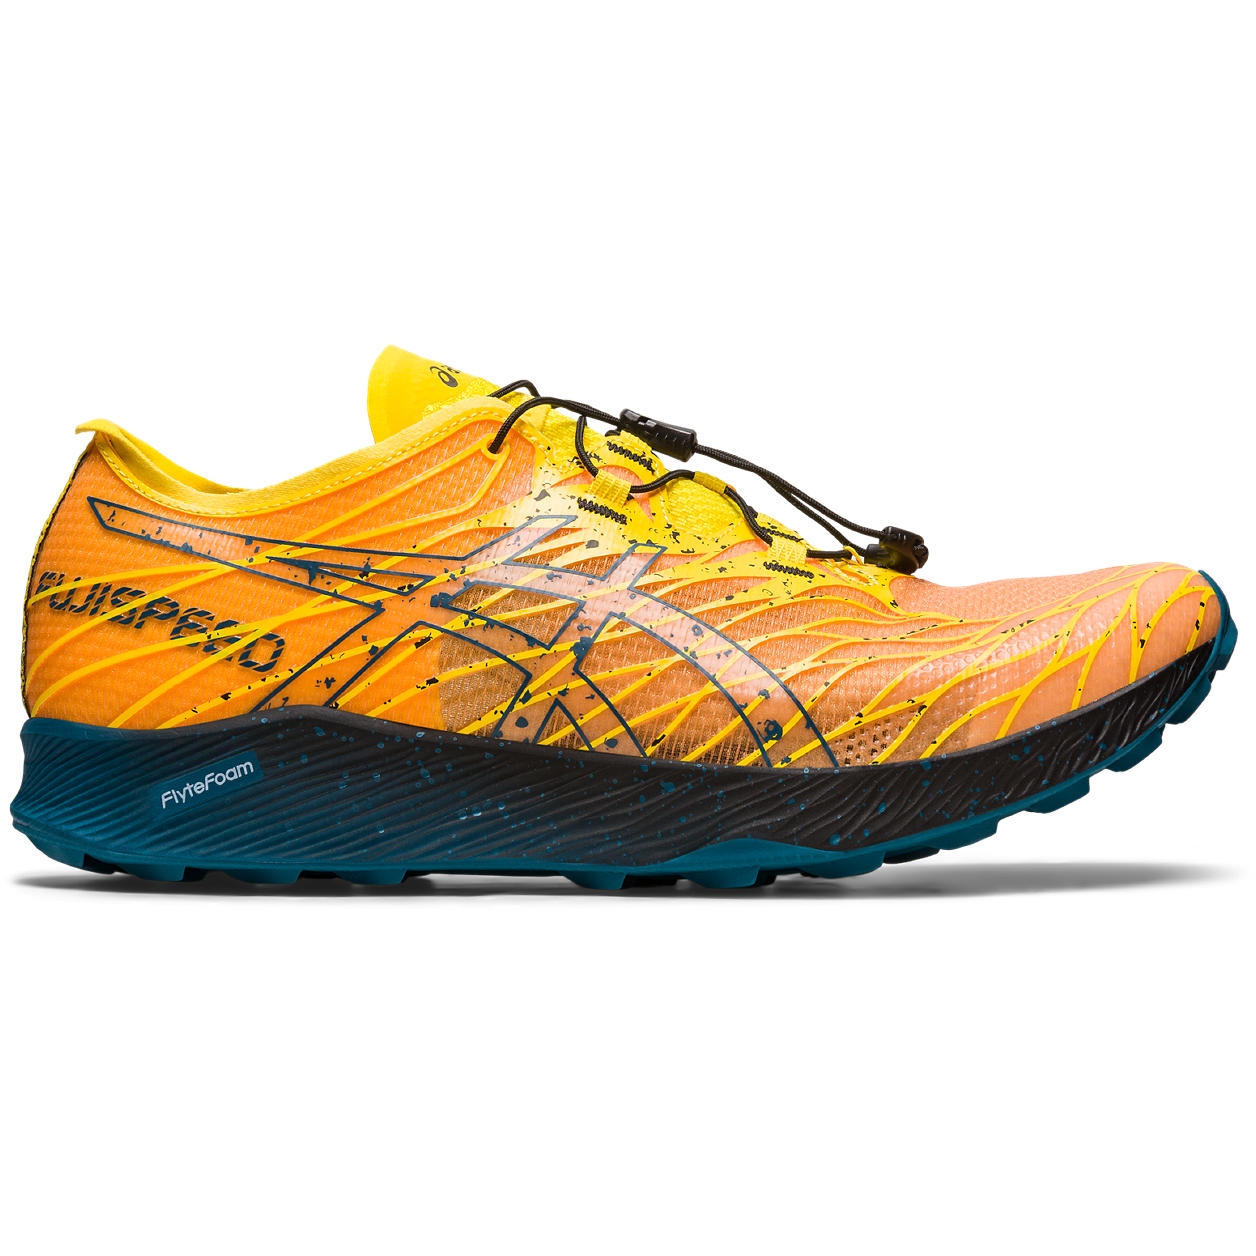 Picture of asics Fujispeed Trail Running Shoes Men - golden yellow/ink teal